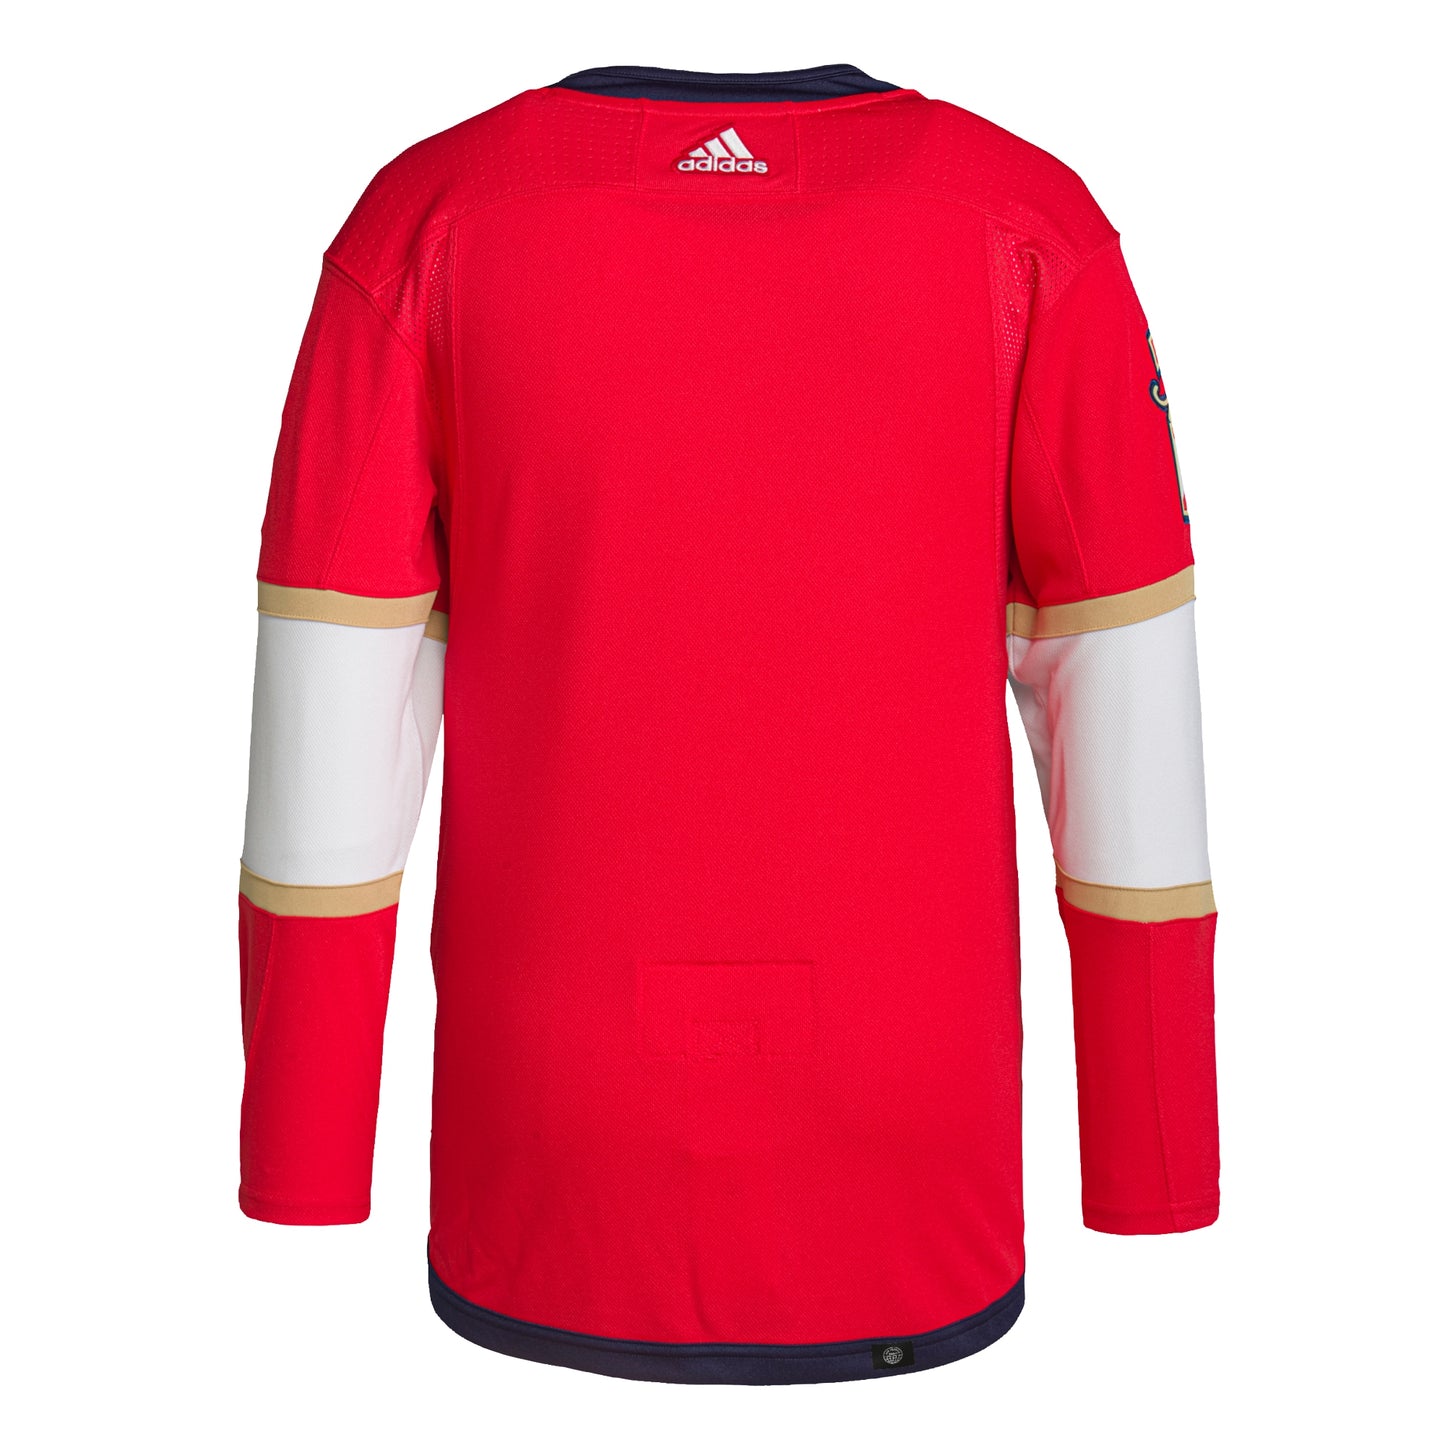 Florida Panthers adidas Home Primegreen Authentic Pro Jersey - Red